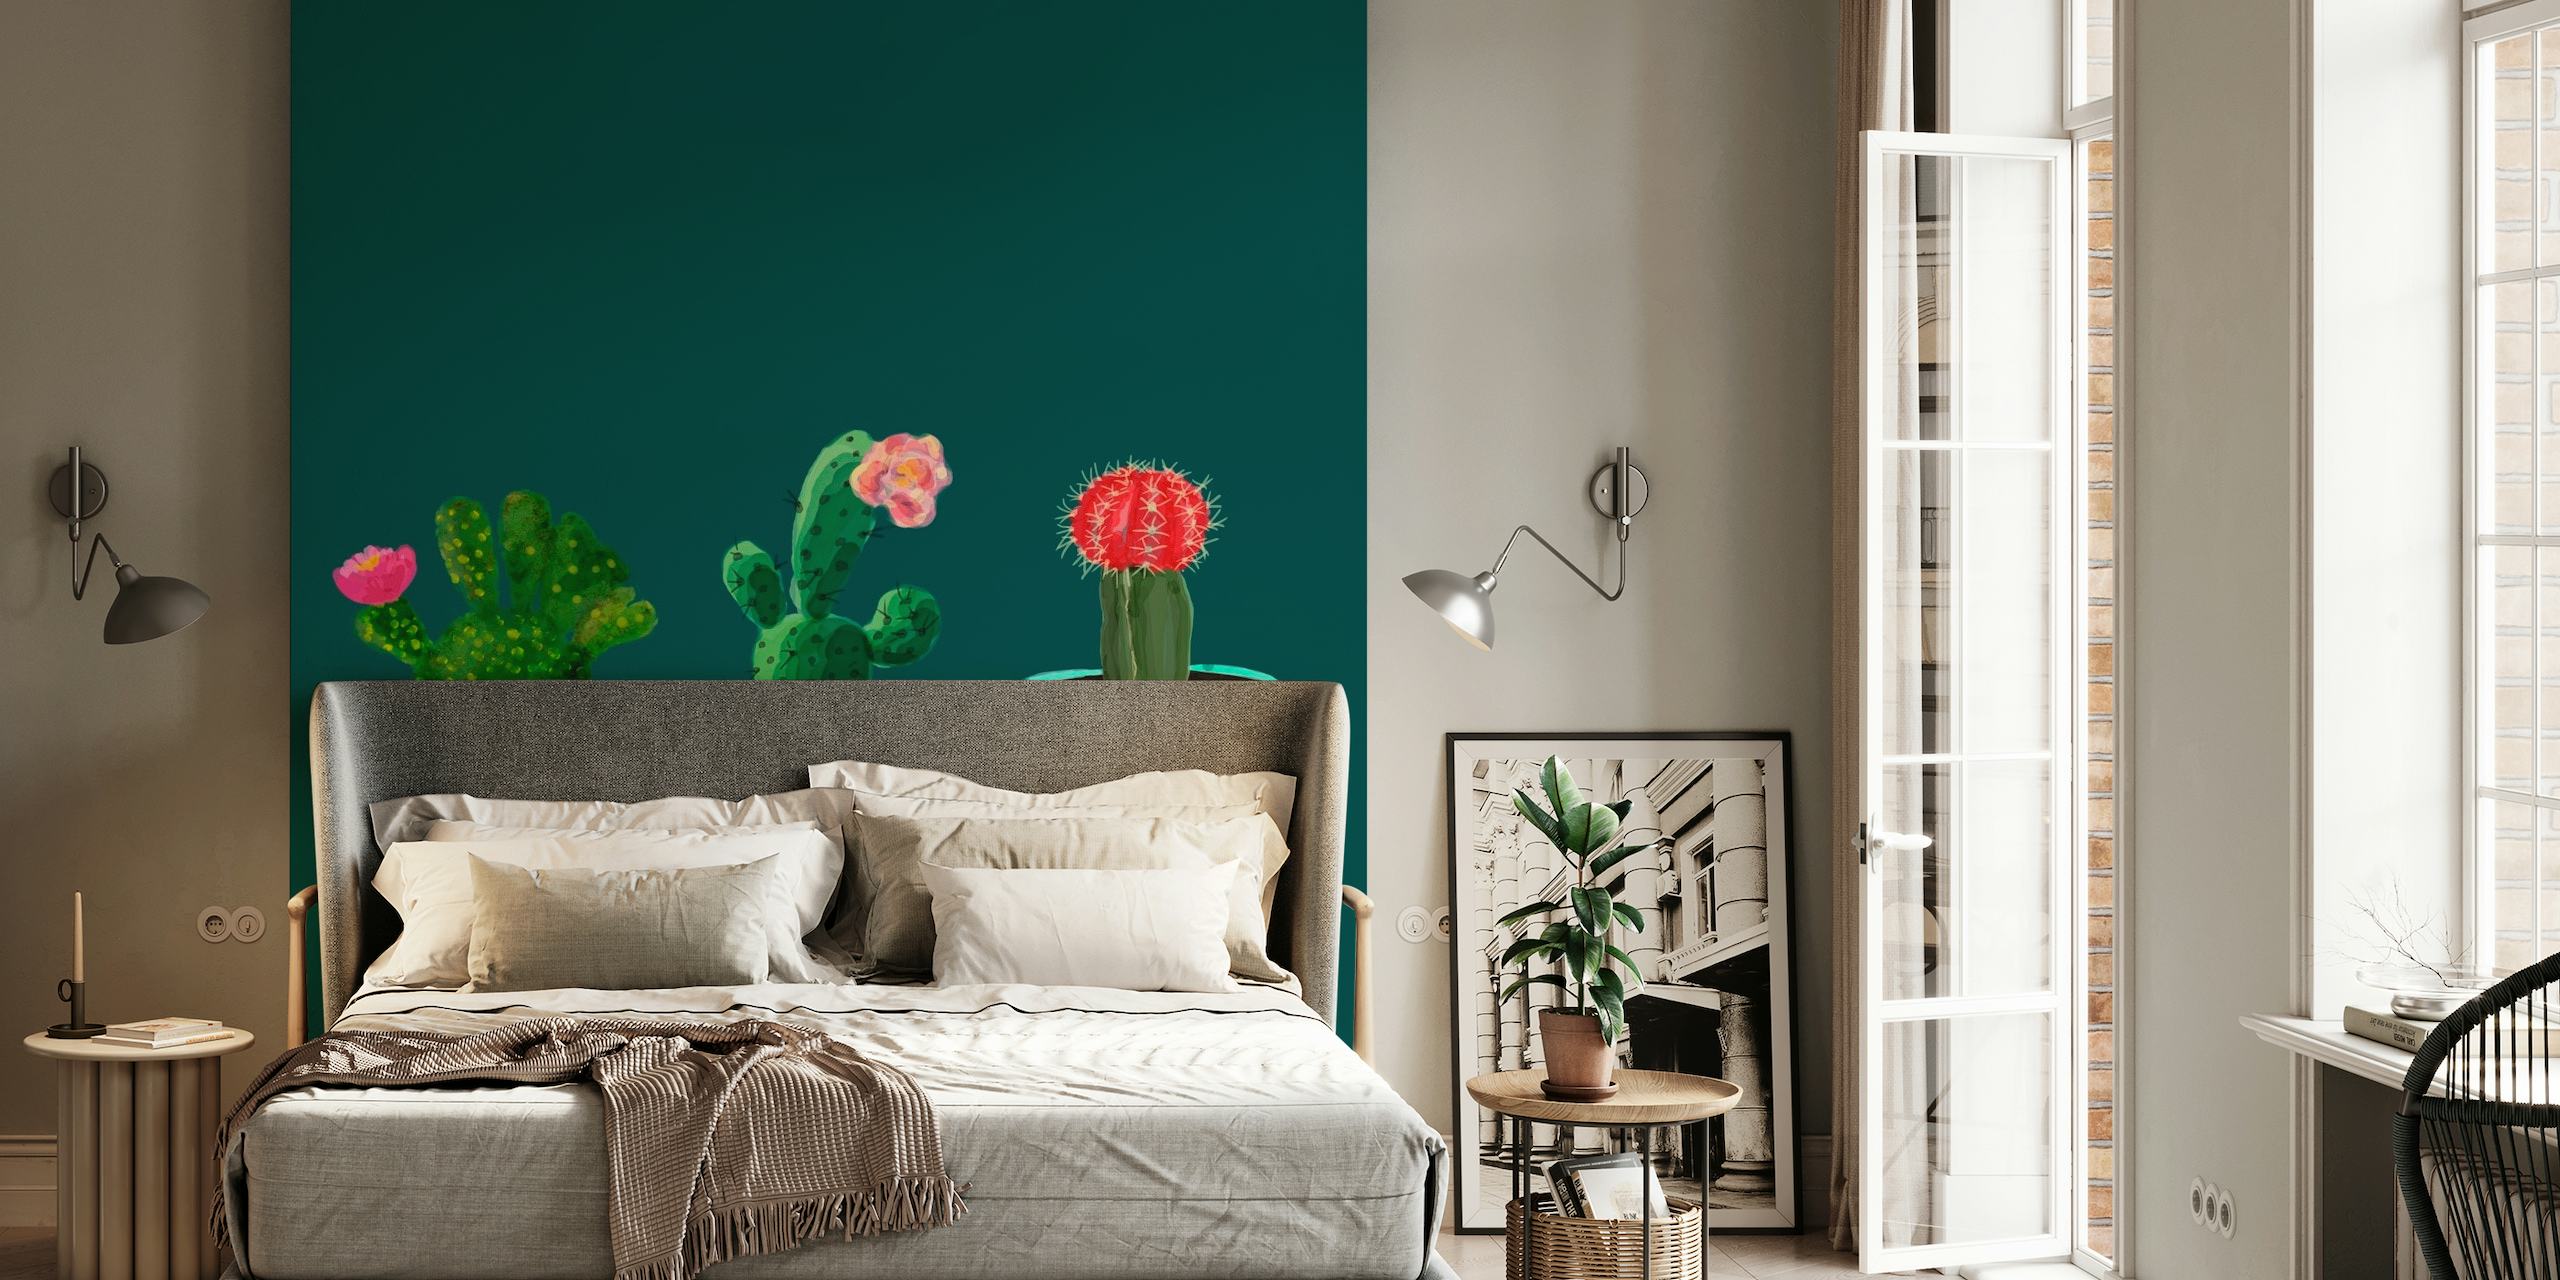 Three potted cacti illustration on a wall mural with a dark background.